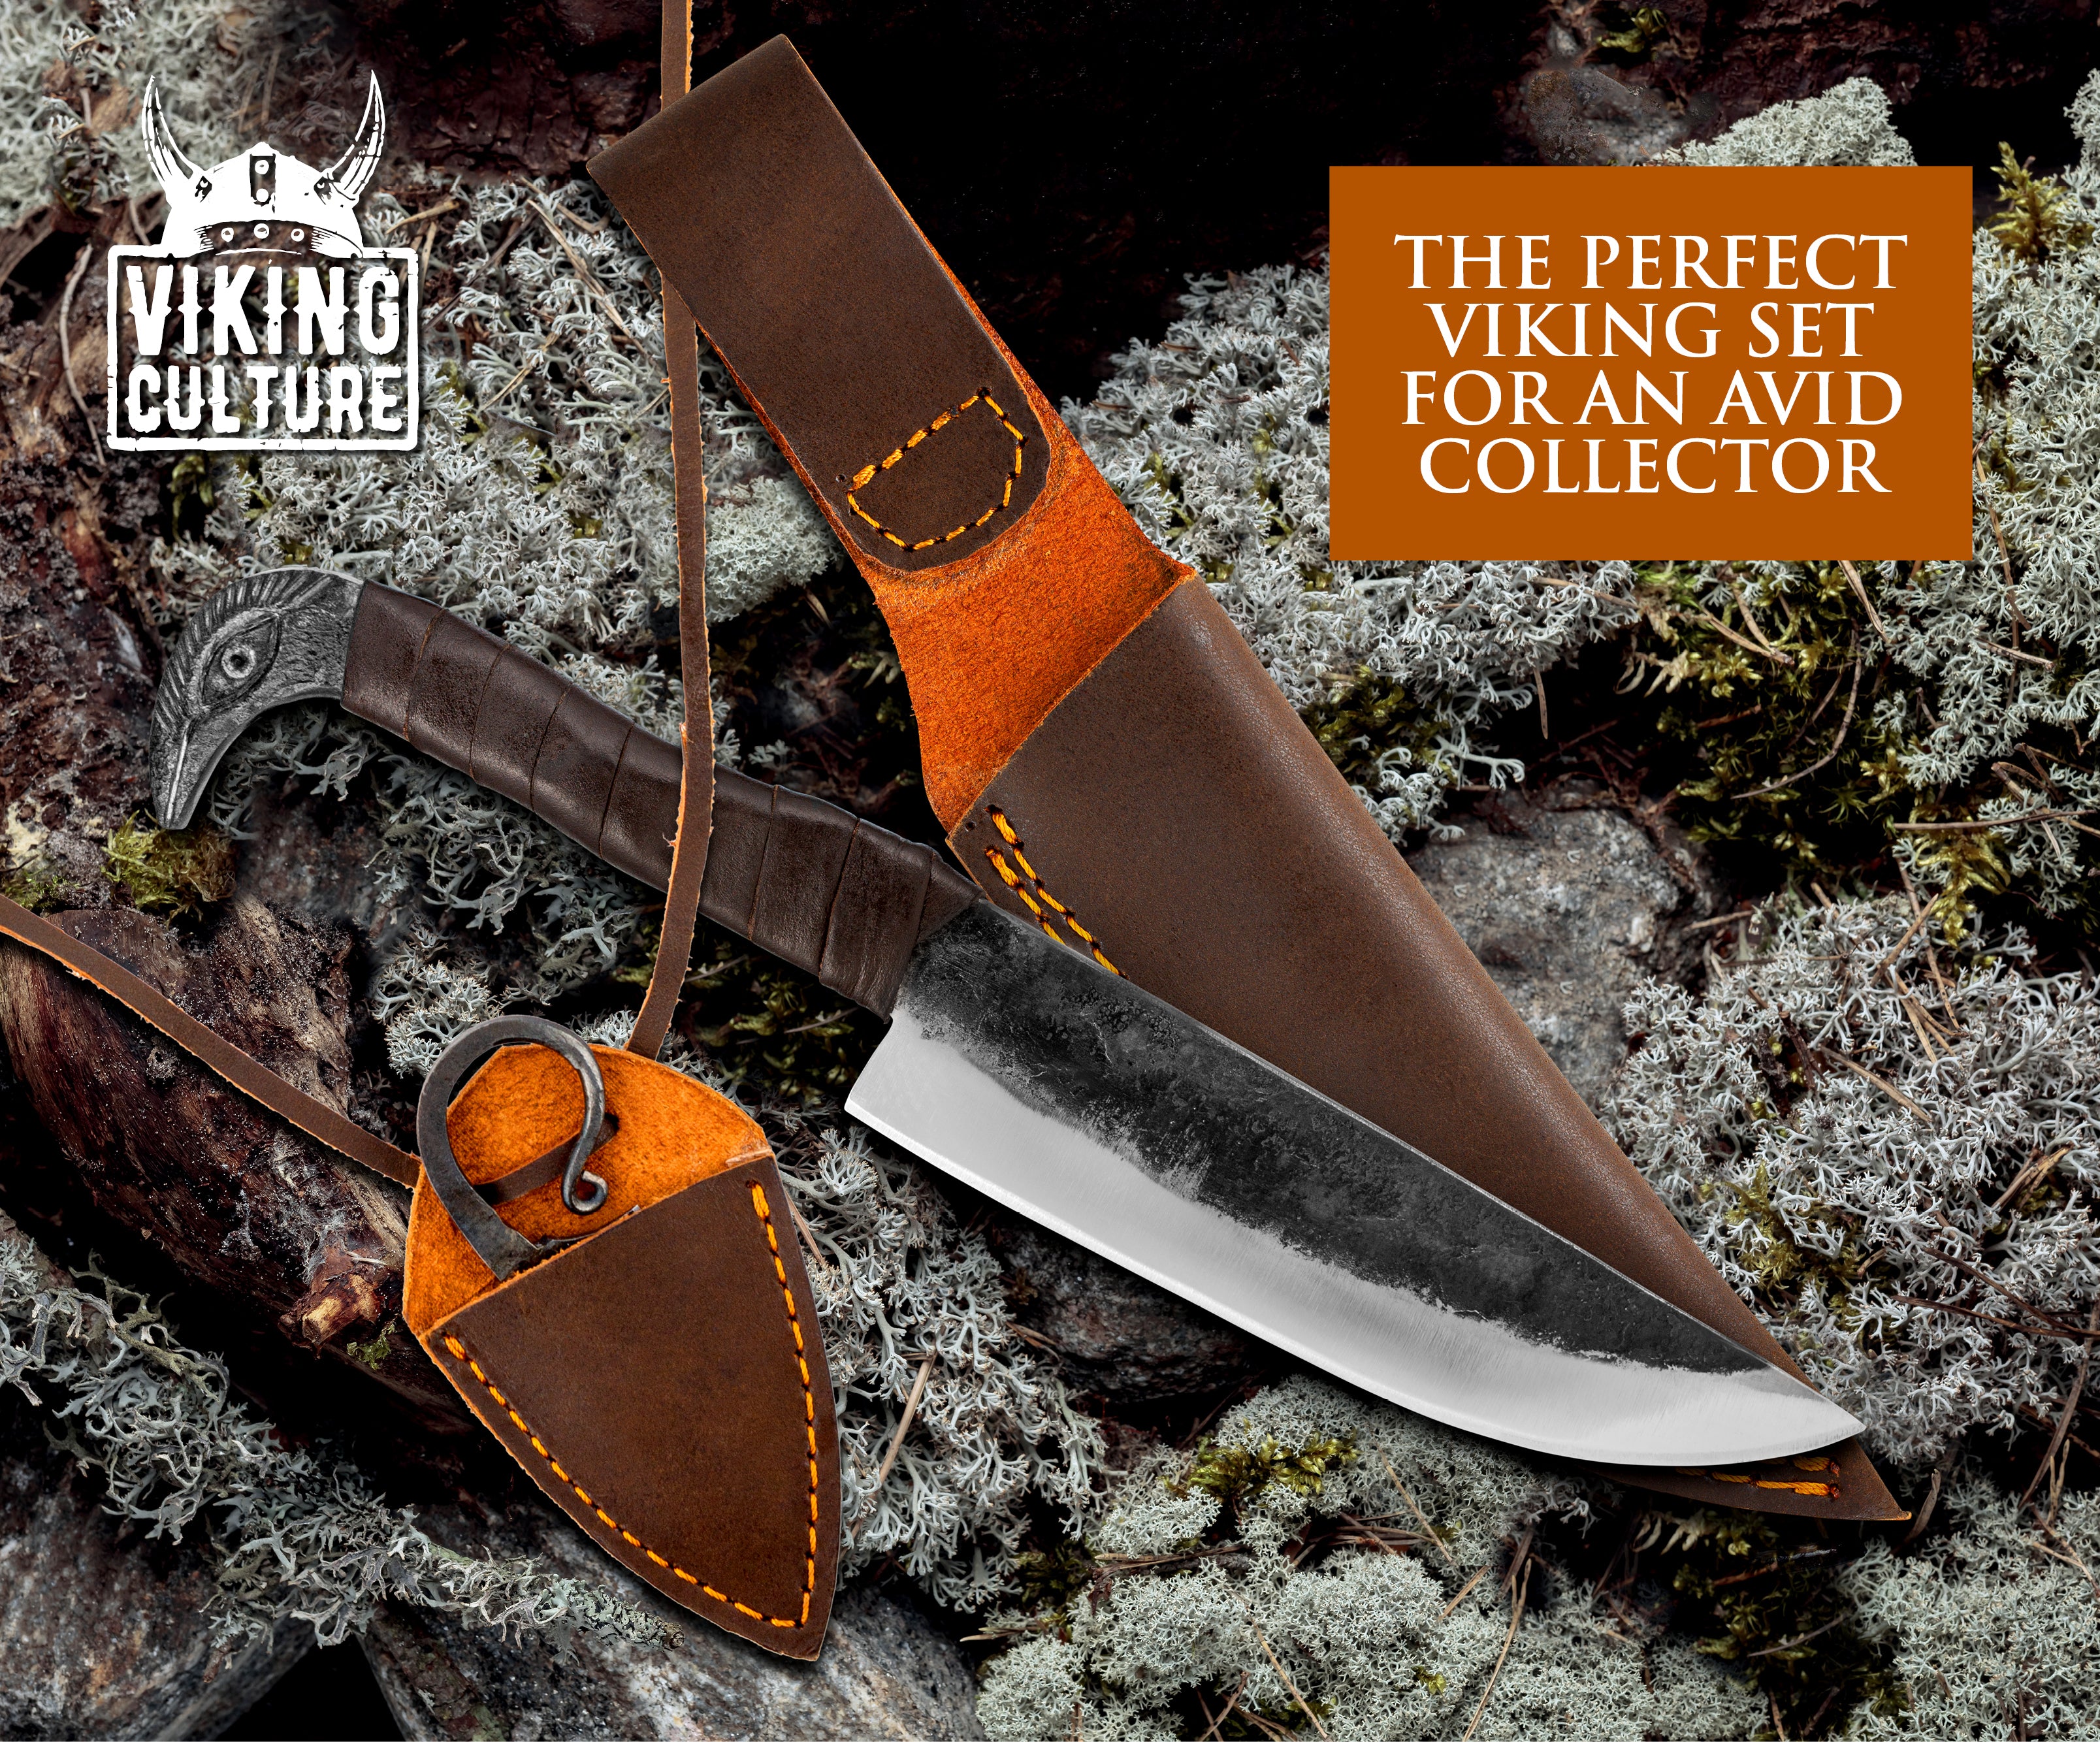 Viking Culture 2-Piece Viking Knife Set - 10.3" Raven-Head Viking Knife with 6.5" Blade & Leather Sheath - 3" Celtic Pocket Knife with Necklace Case - Sharp Hand-Forged Real Carbon Steel